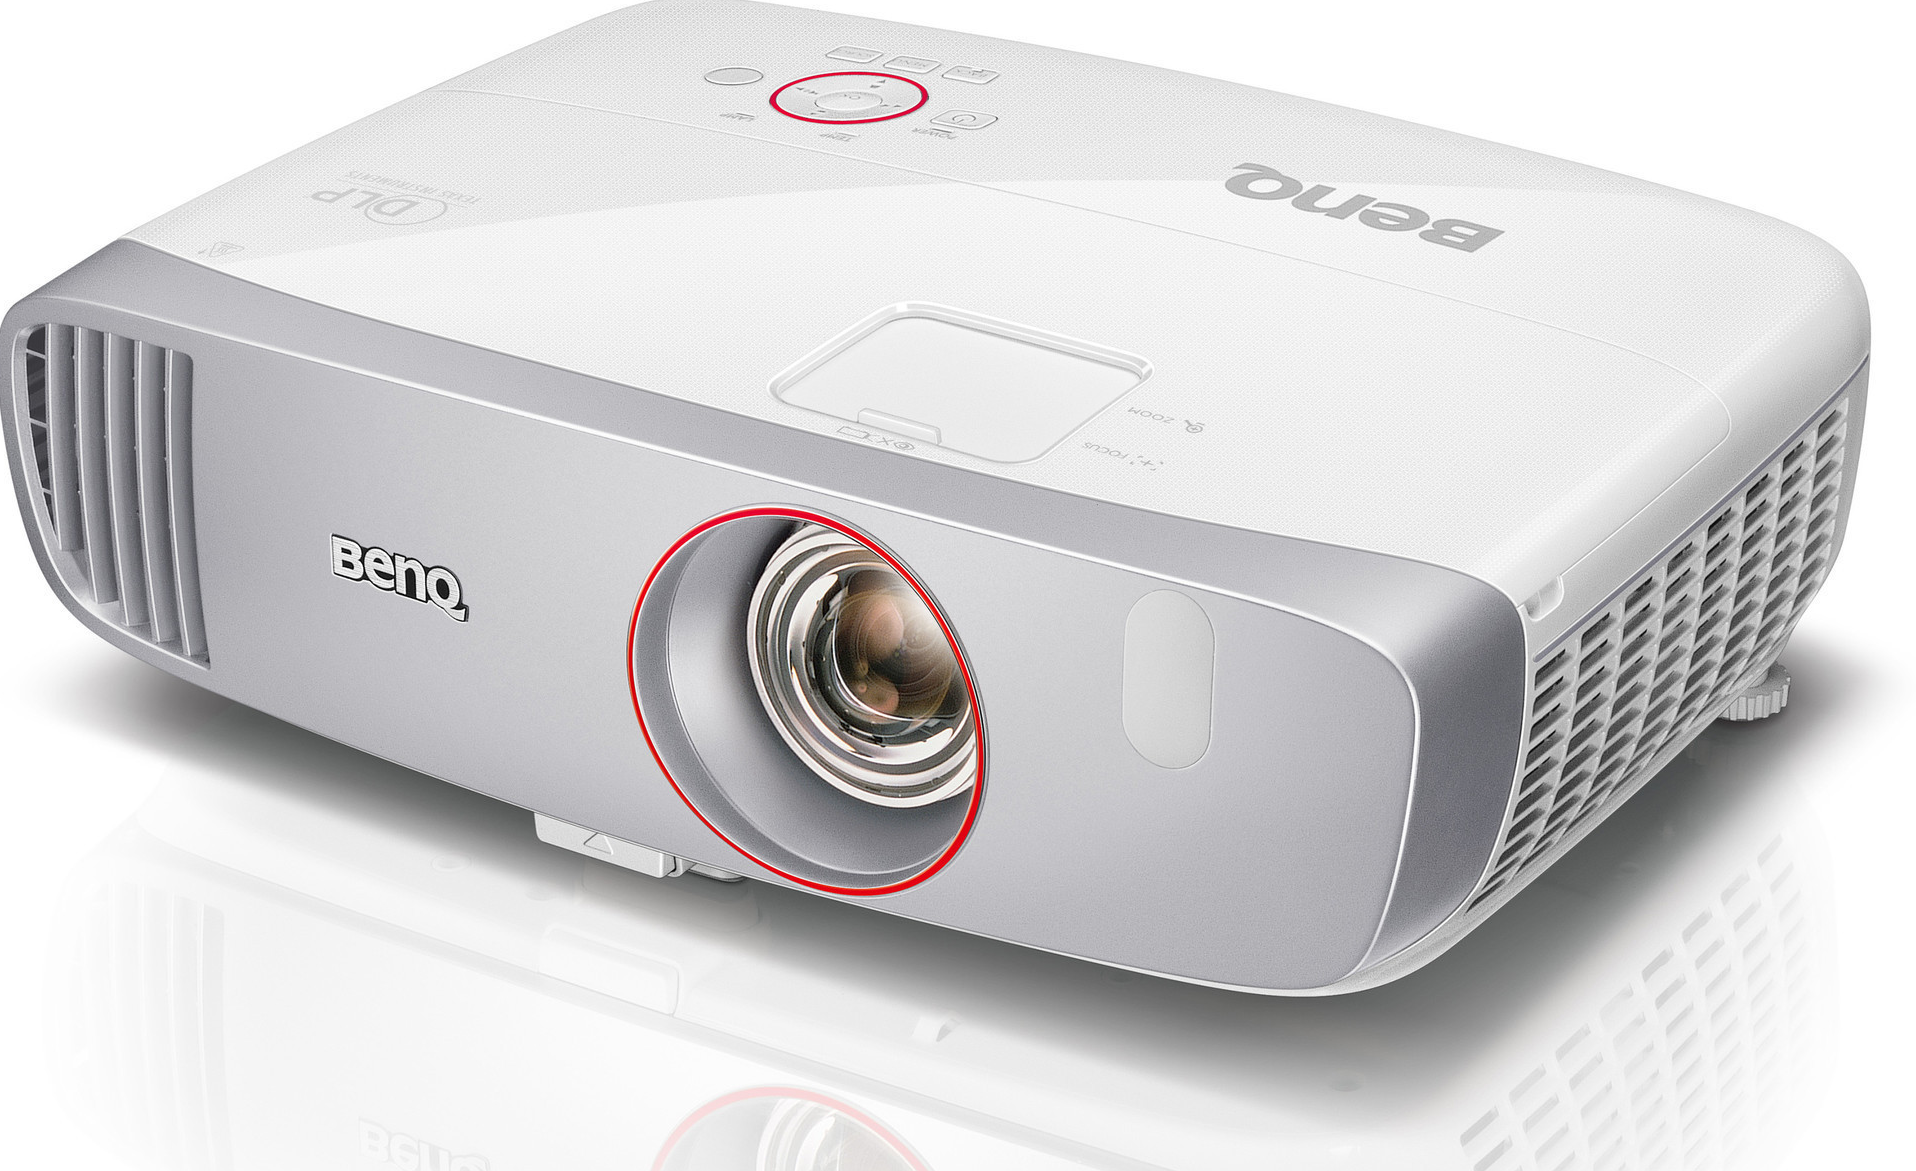 5 reasons gamers should get the benq w1210st projector image 1